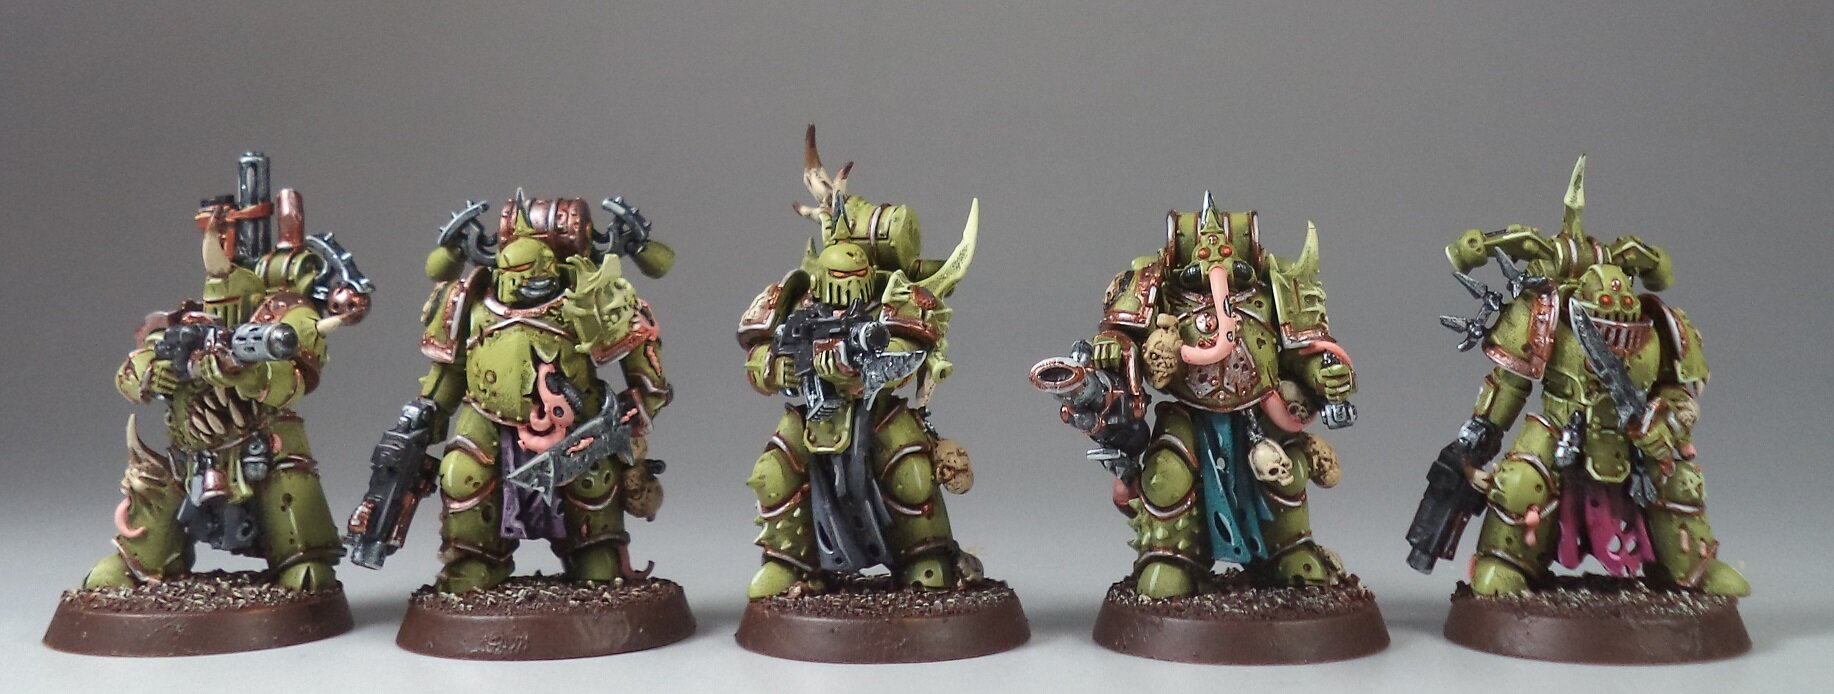 40k miniature painting service gaming painting painting commissions deathguard nurgle (7).JPG